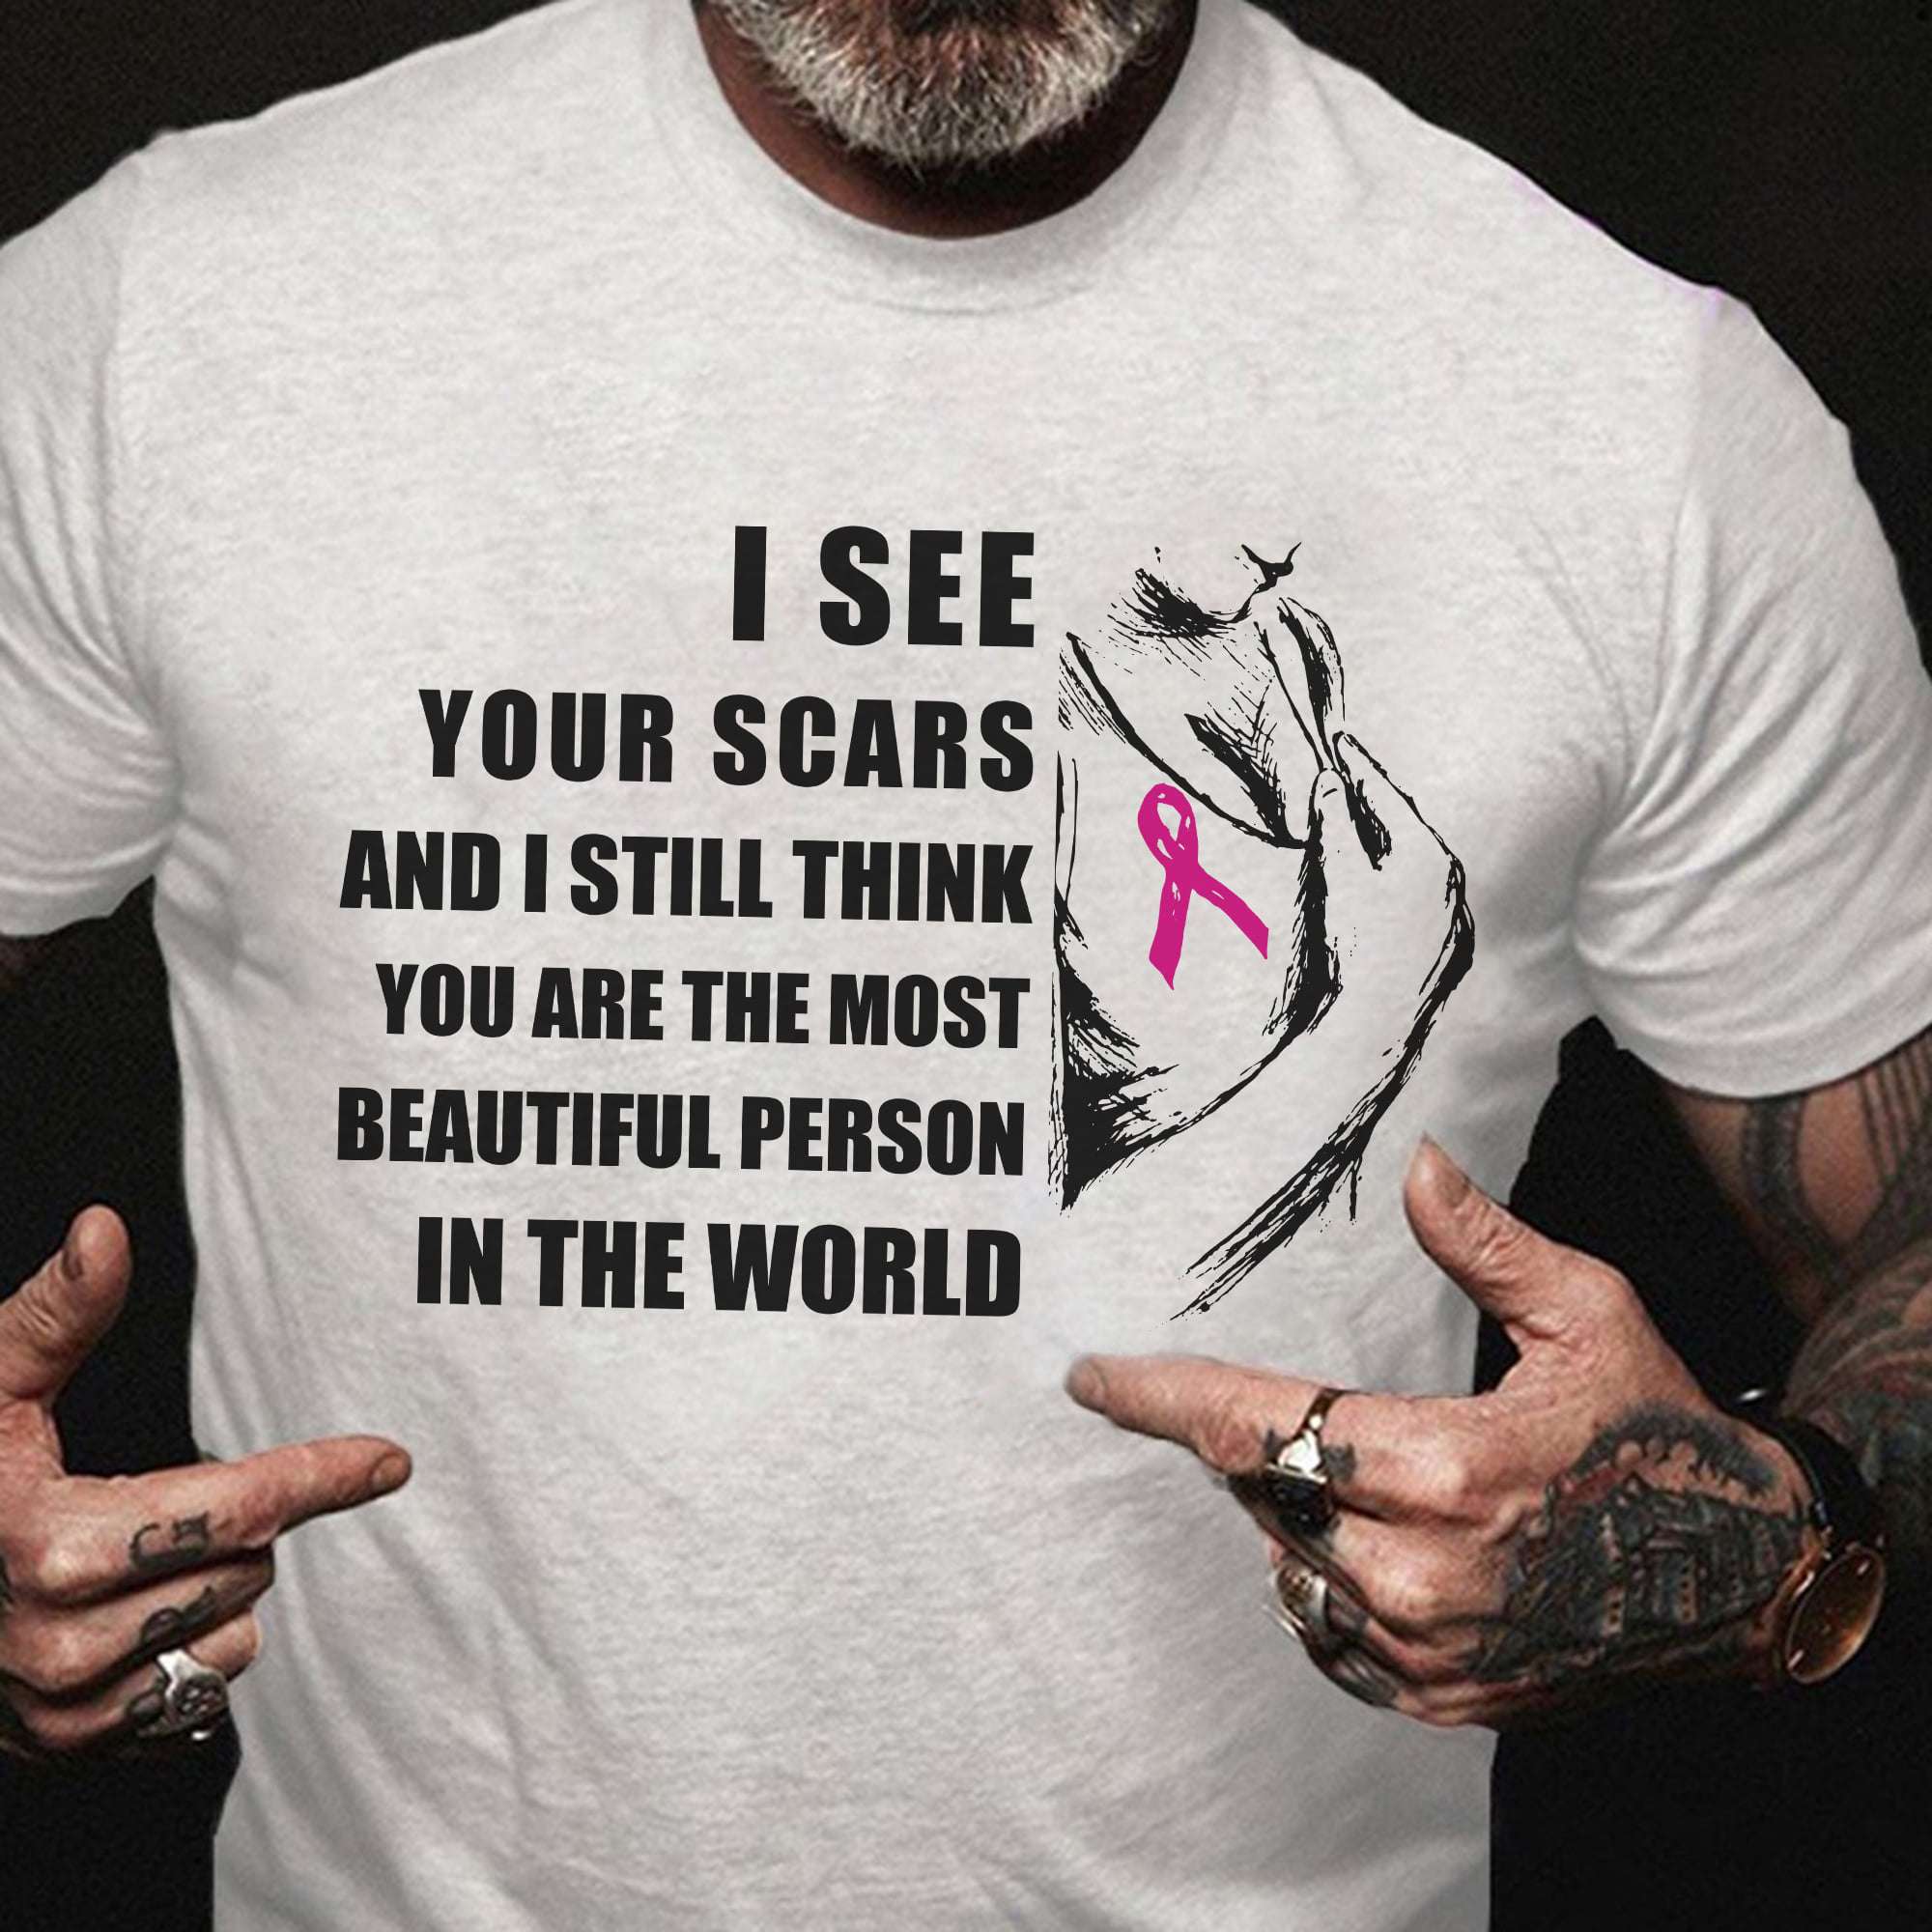 Breast Cancer Awareness - I see your scars and i still think you are the most